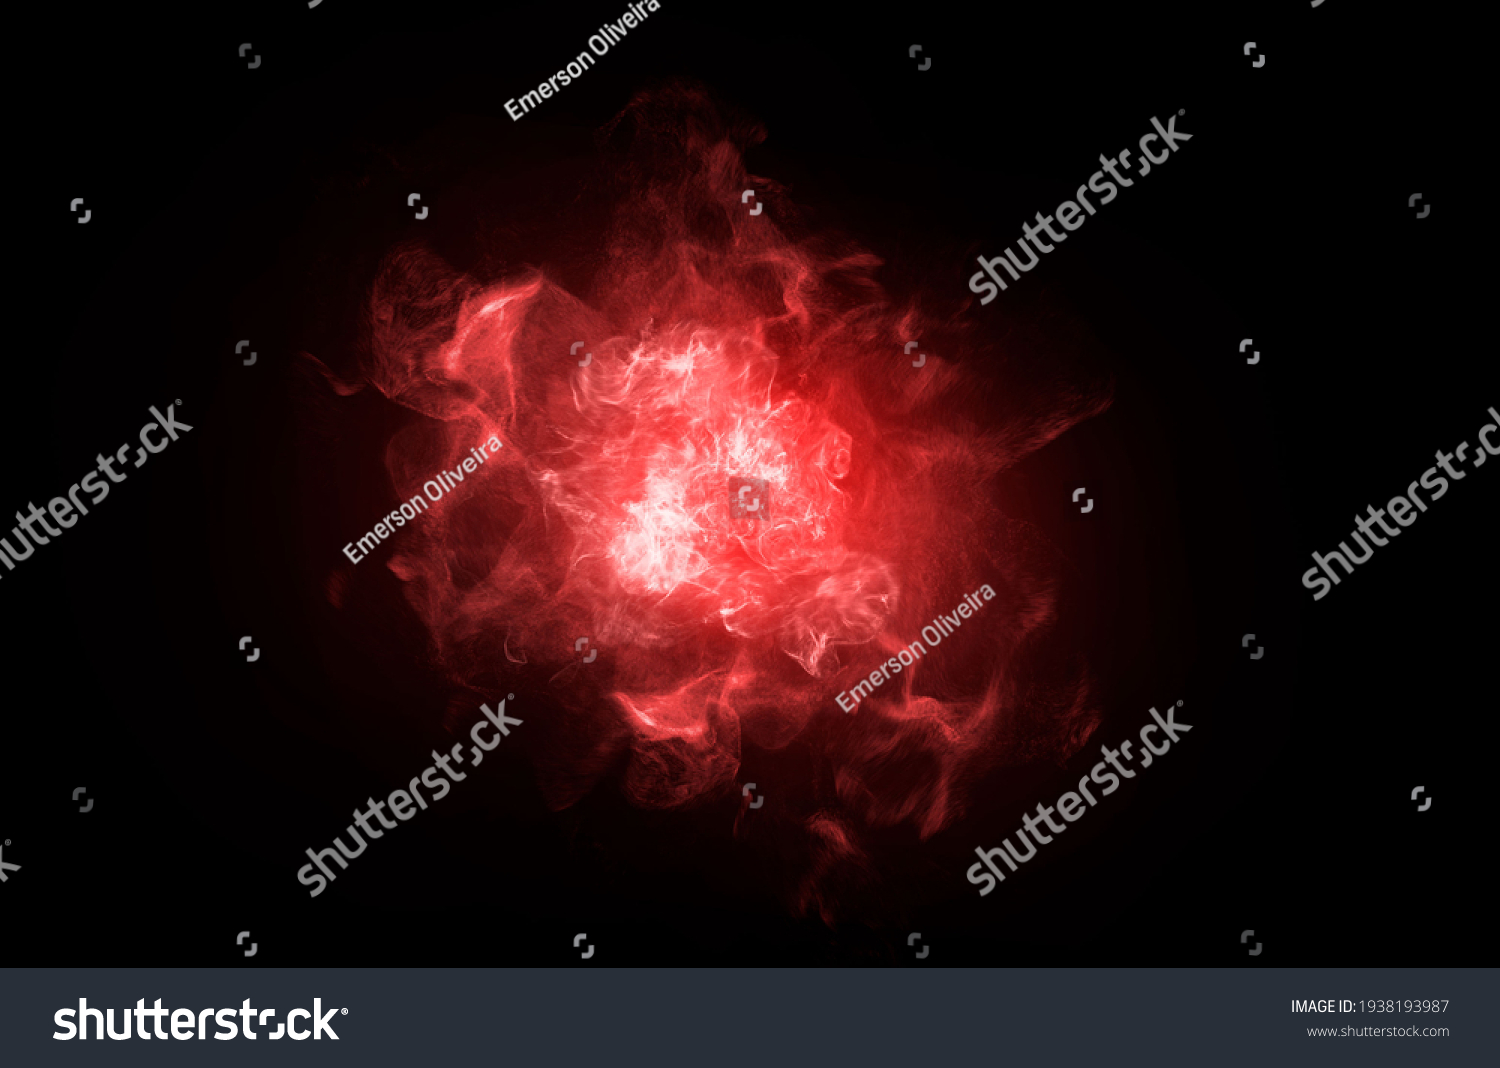 magic particles in red color with a dark background perfect for use with high quality overlay special effect #1938193987